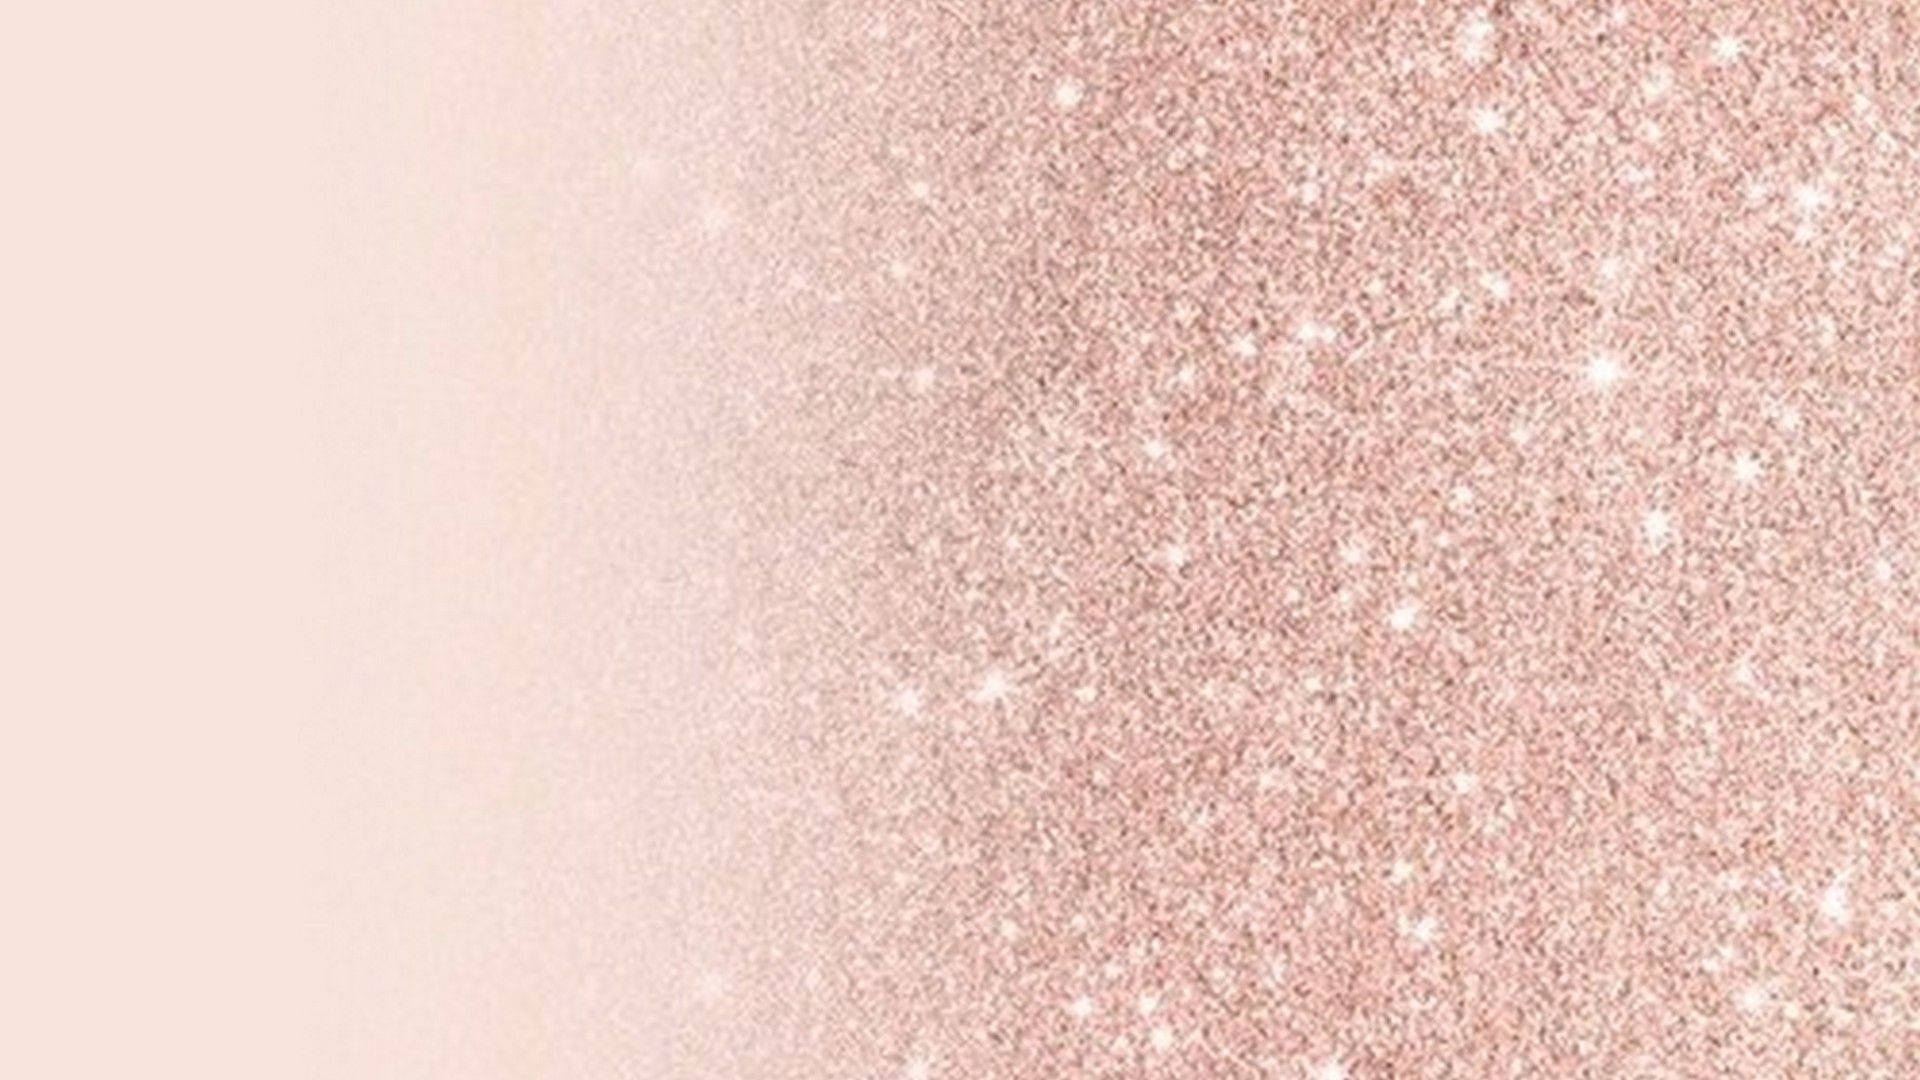 Decorate Your Room With The Beautiful Duo Of Glittered And Plain Rose Gold! Background